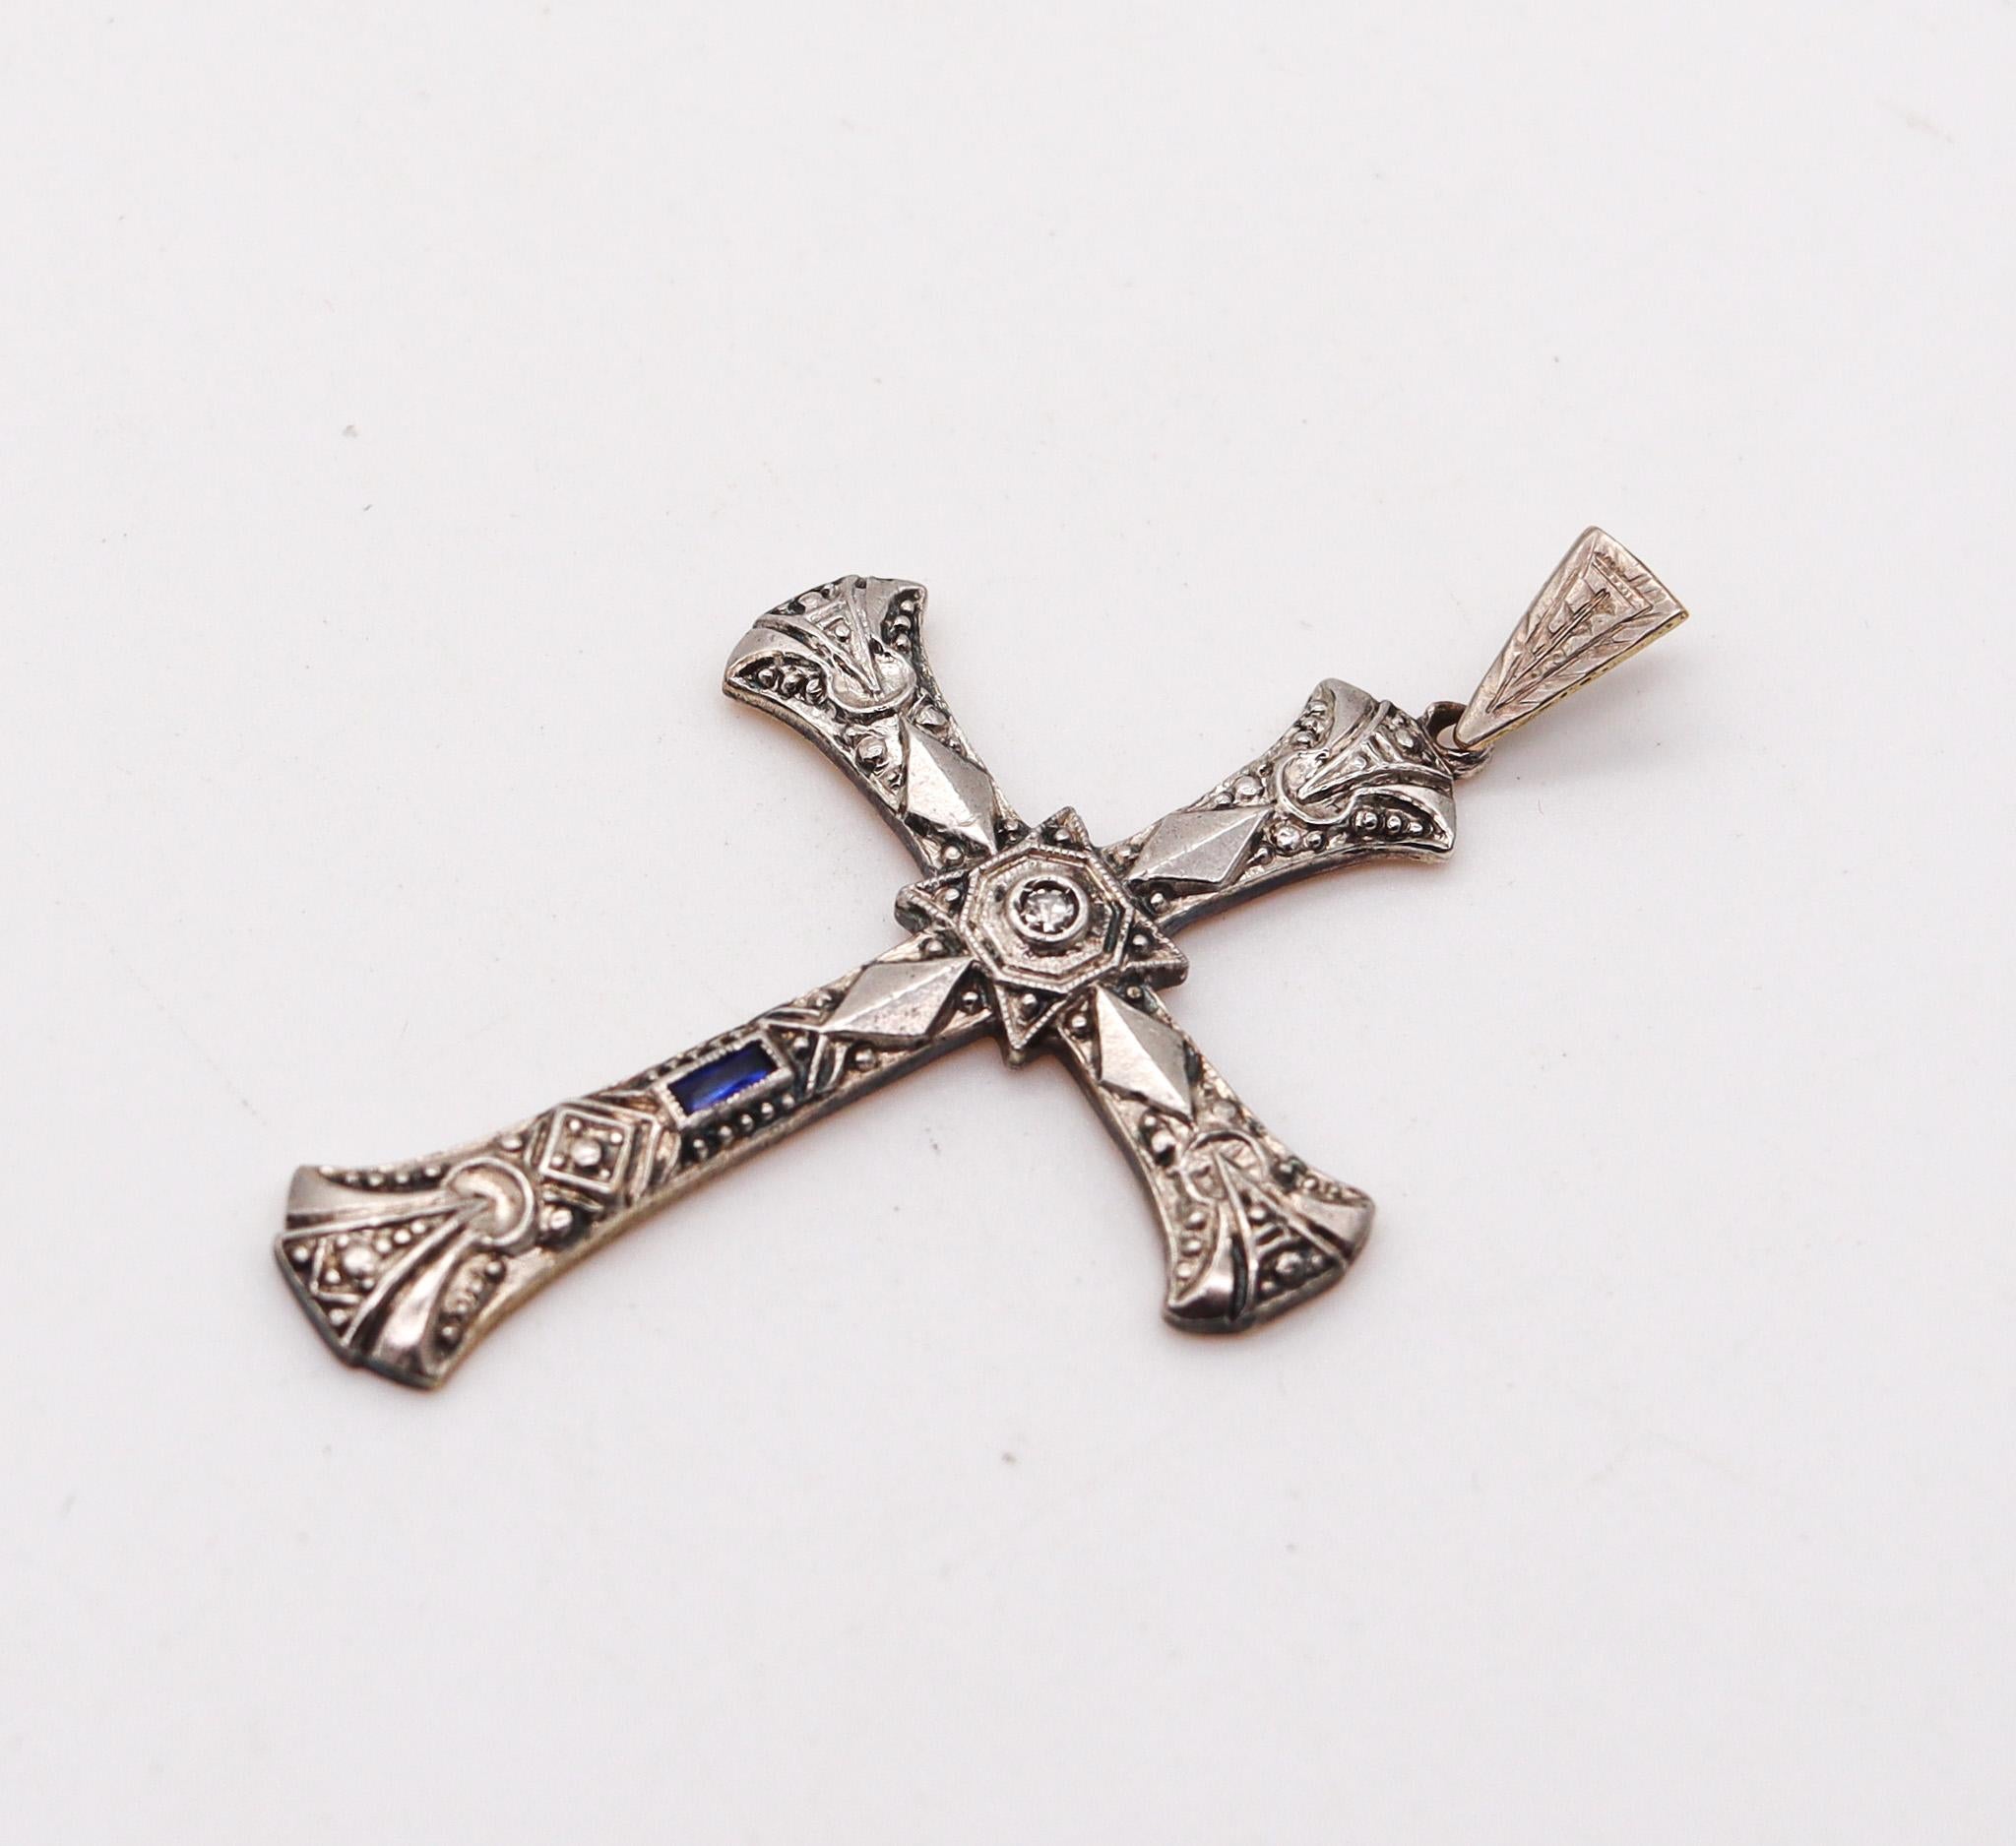 Edwardian belle époque cross.

Beautiful cross from the Belle Epoque period, created during the Edwardian era (1901-1910), back in the 1905. This delicate cross was carefully crafted with classical Edwardian motif in solid yellow gold of 18 karats,